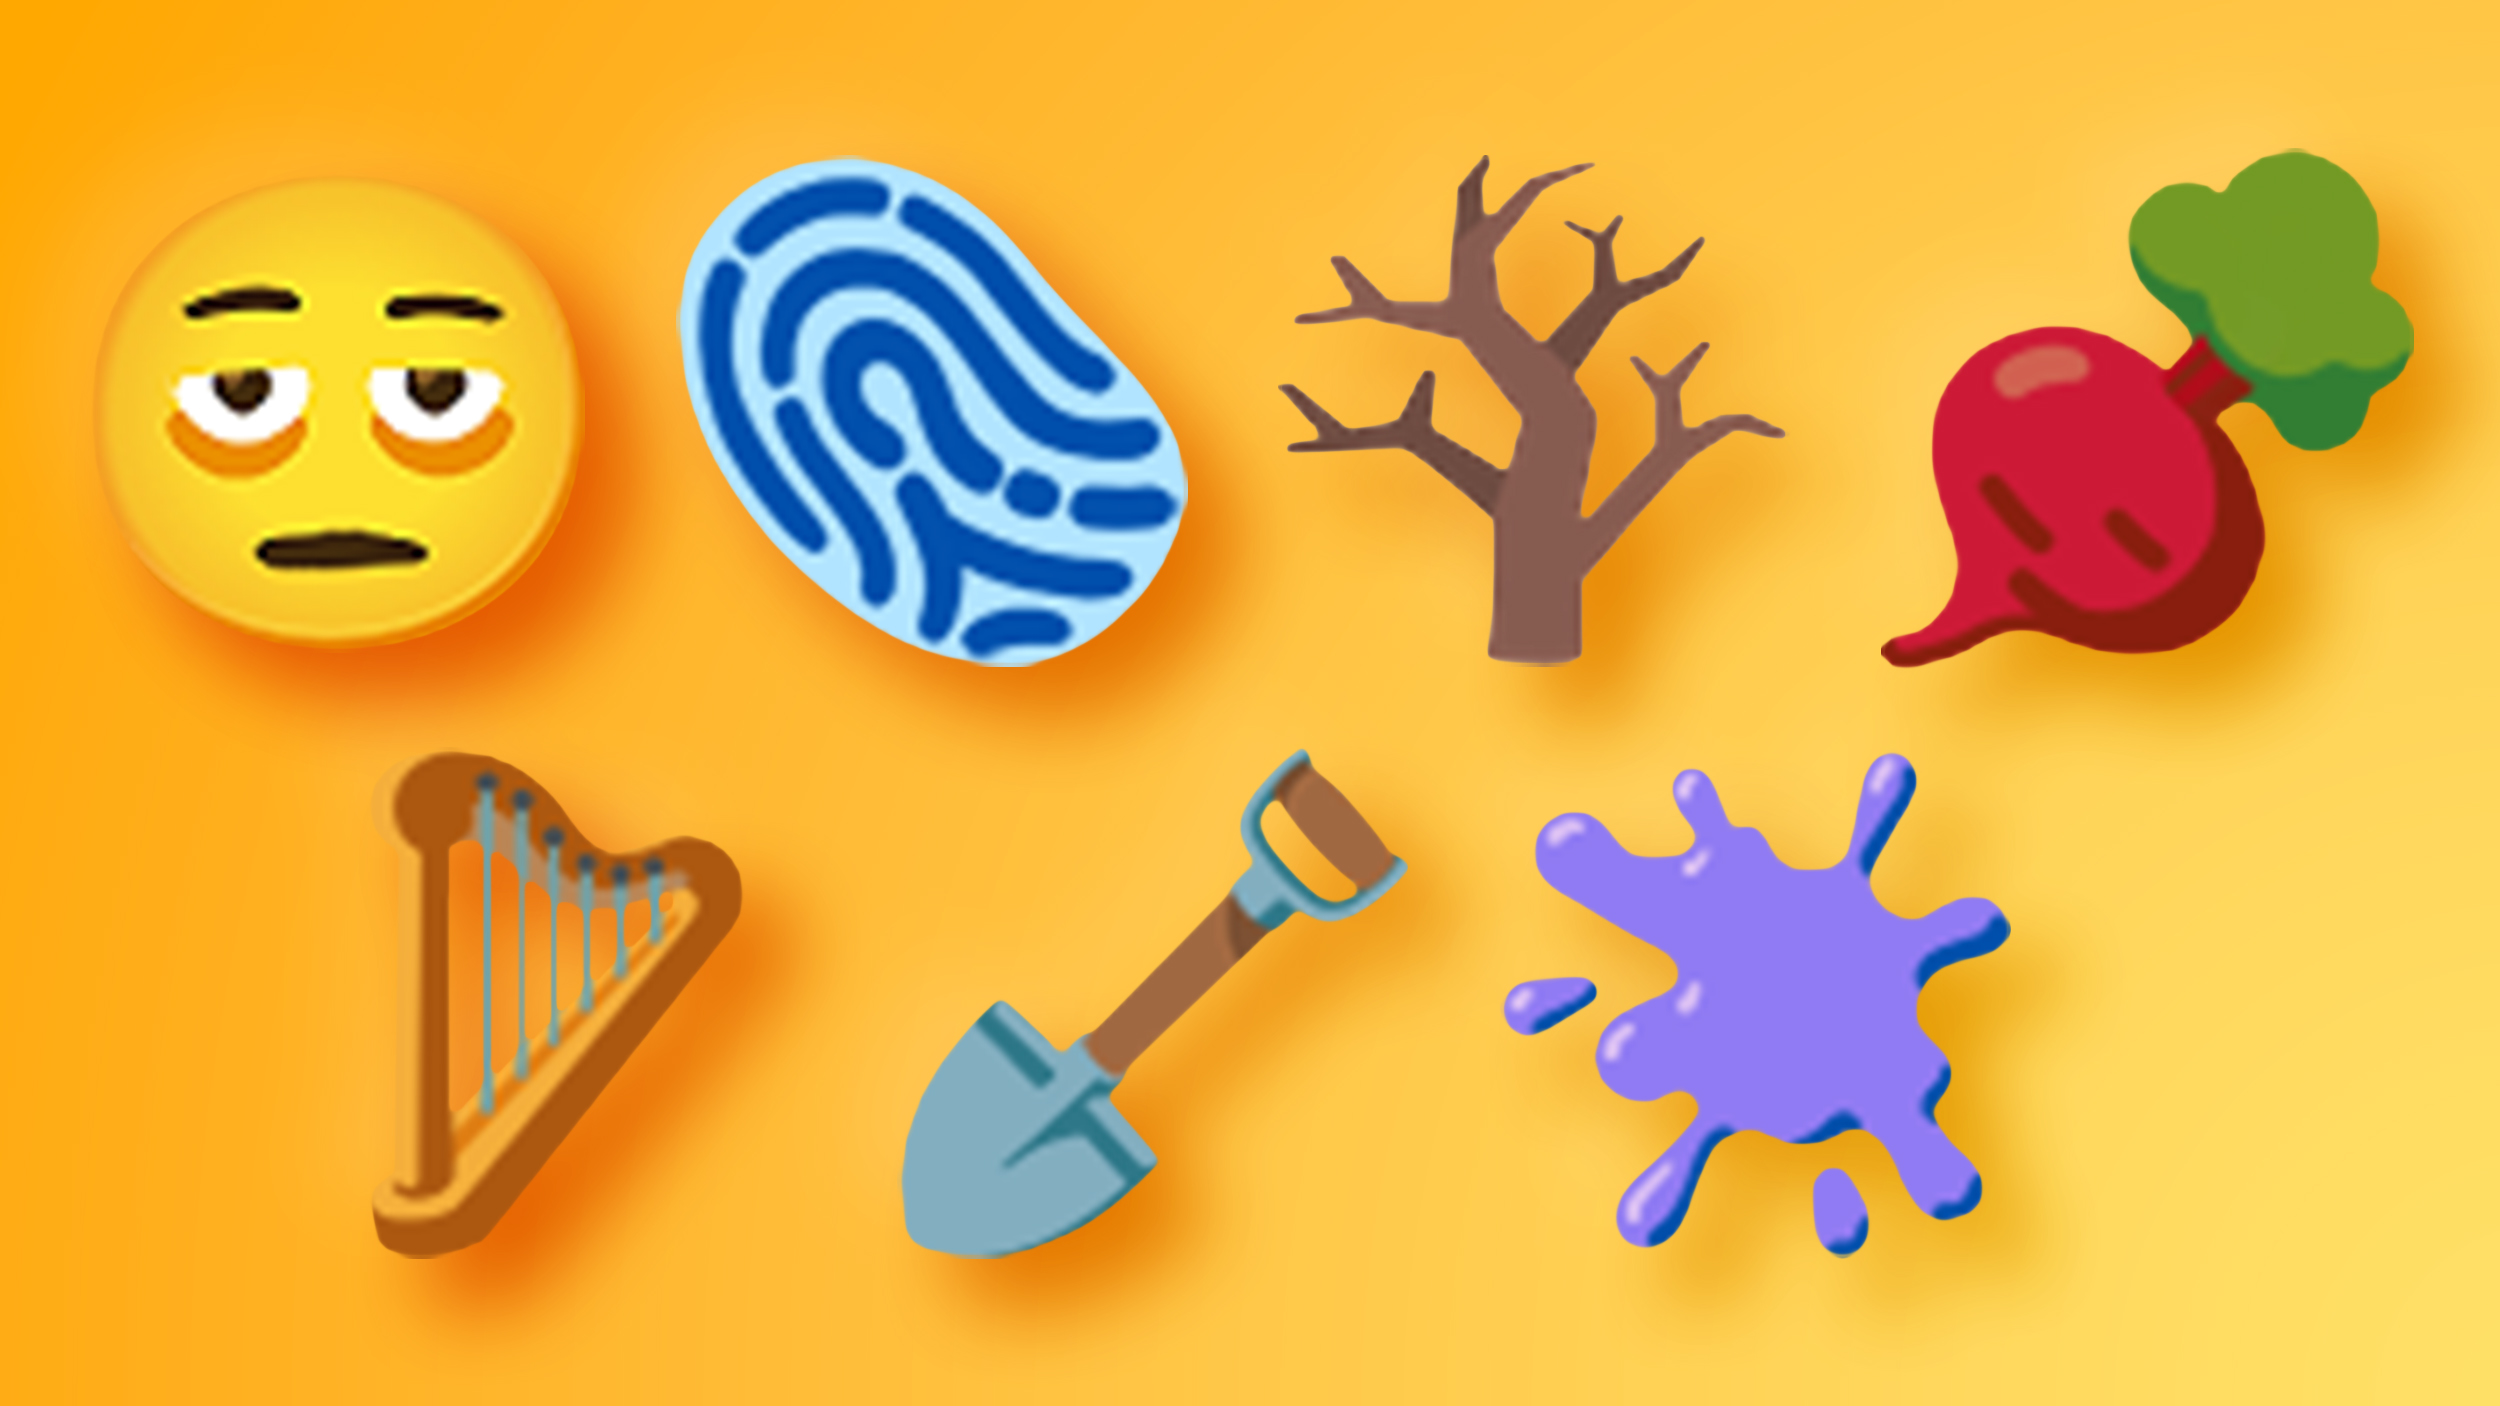 Next Emoji Coming to iOS Could Include Face With Eye Bags, Shovel, Fingerprint, Splatter and More